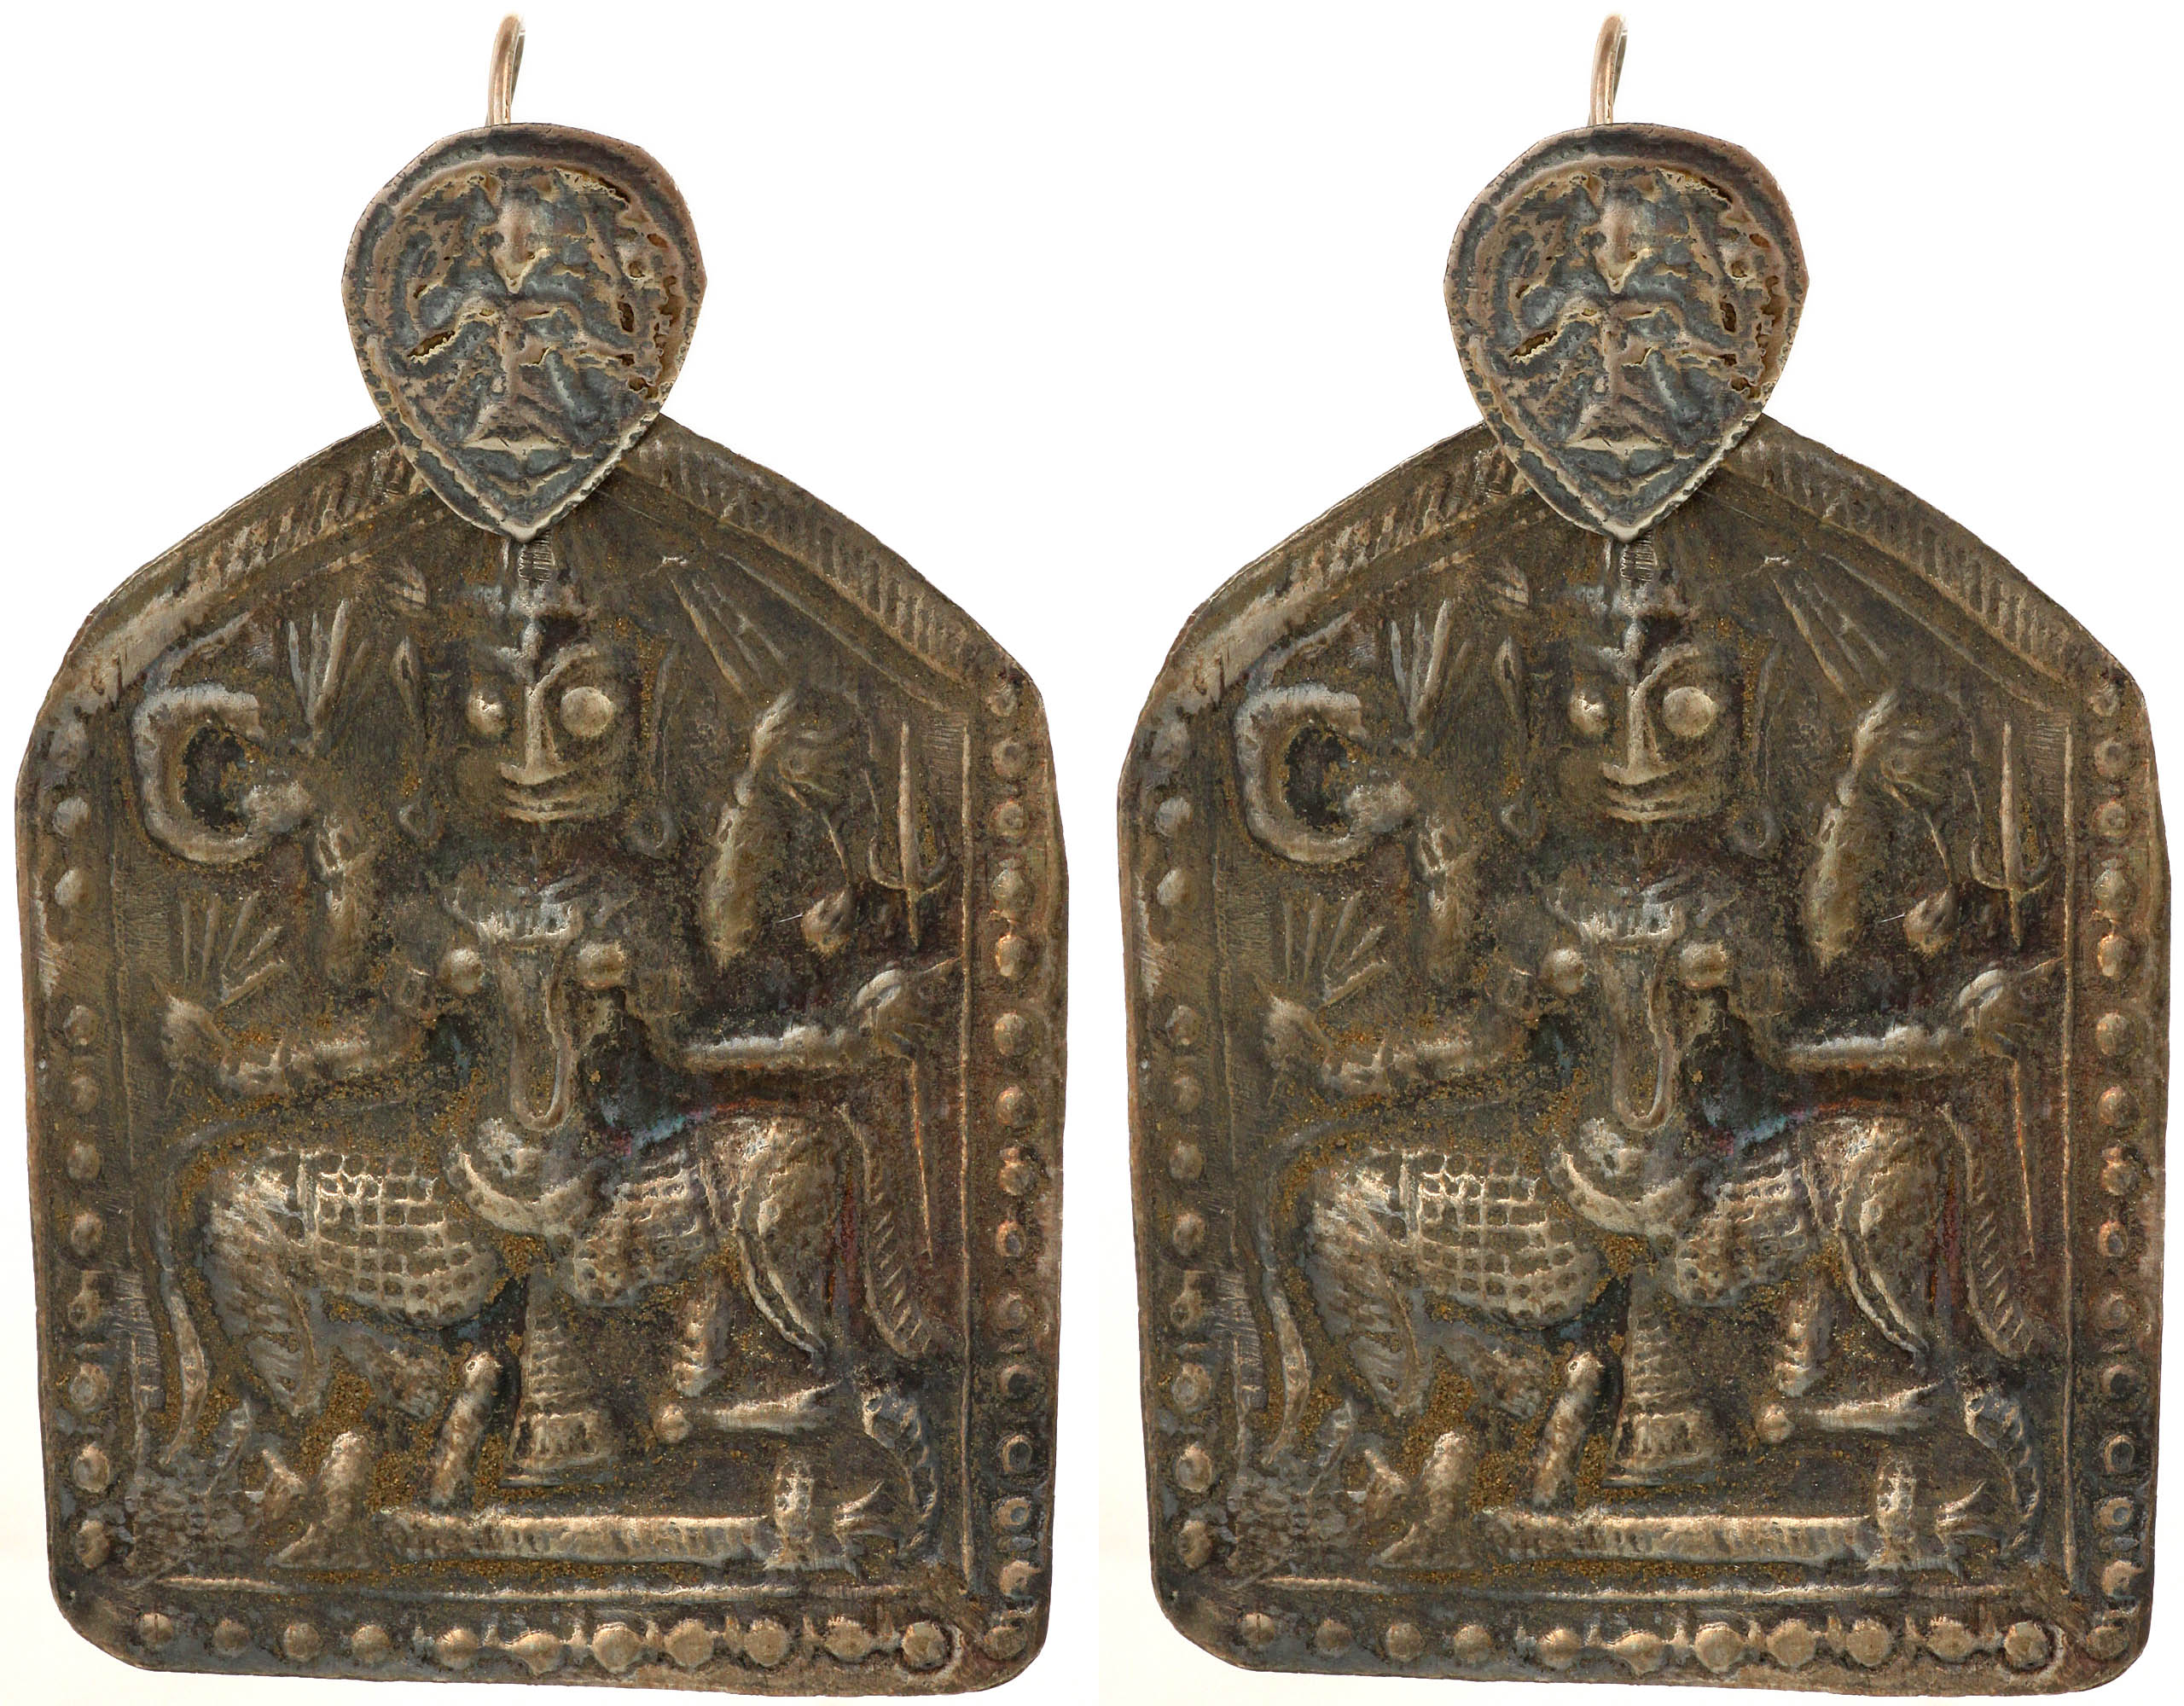 Antiquated Earrings Showing Goddess Kali In The Birth Giving Posture 4927